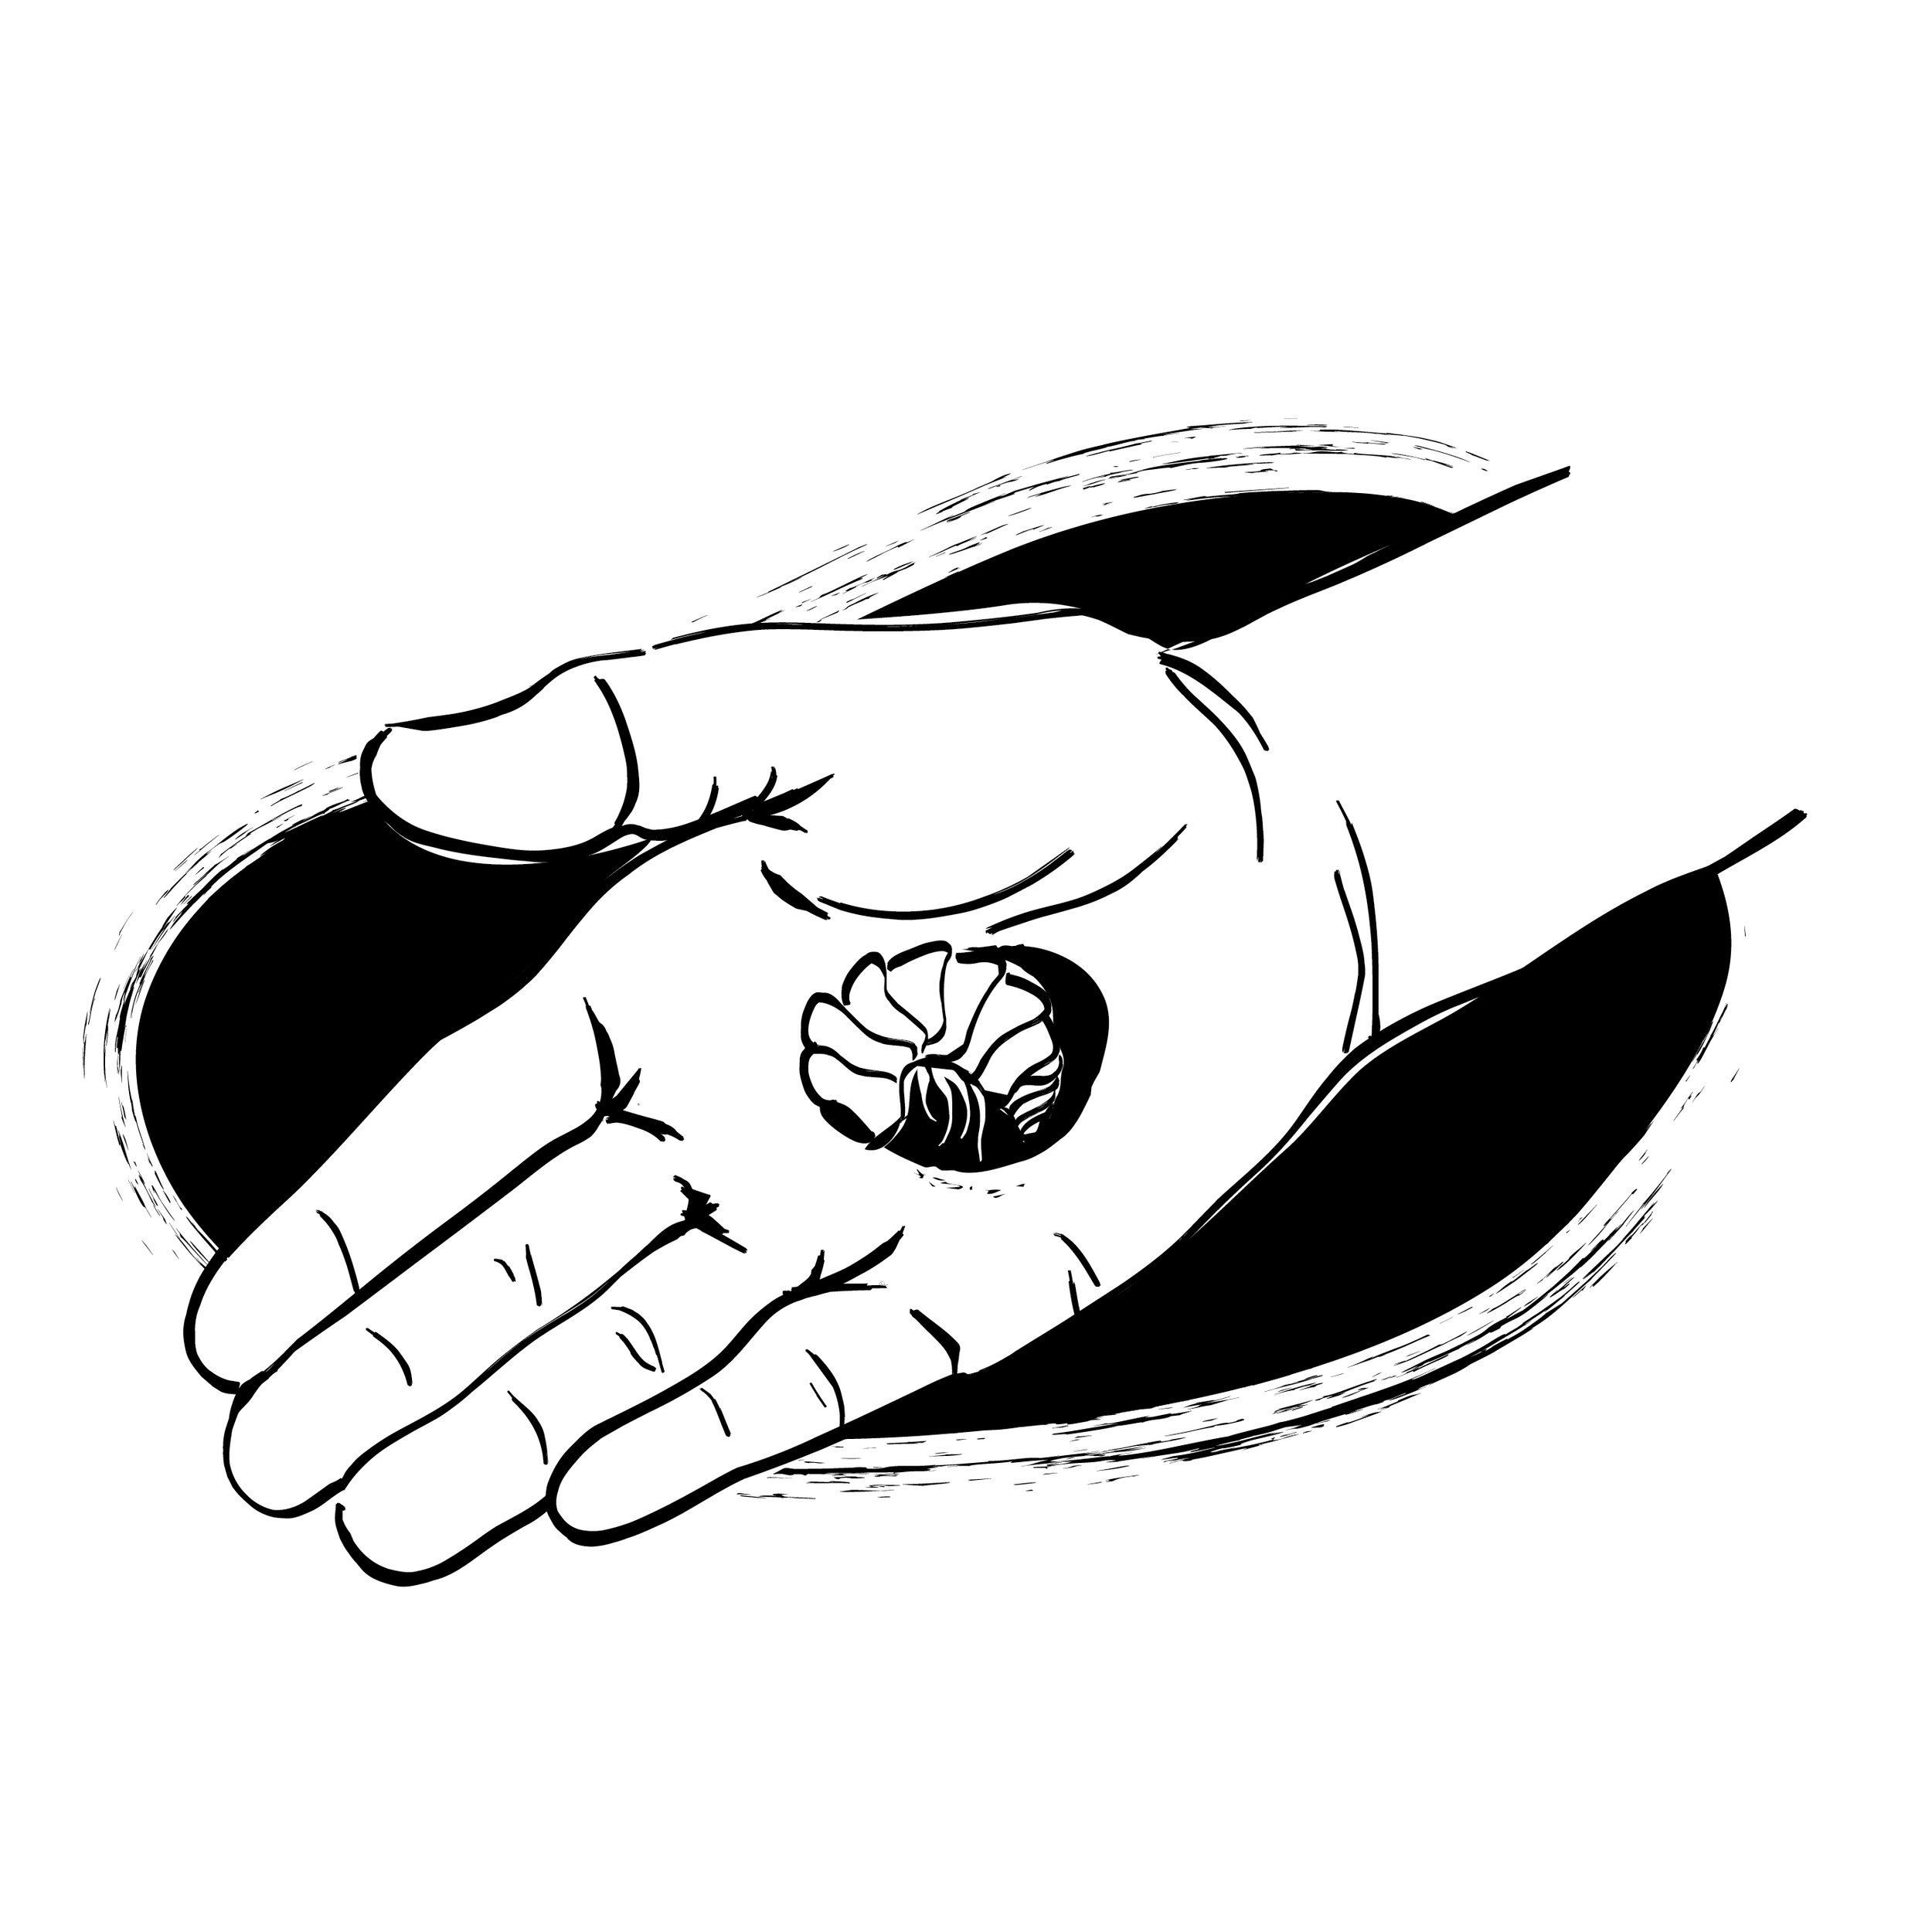 Line drawing of hand holding a curled up grubworm